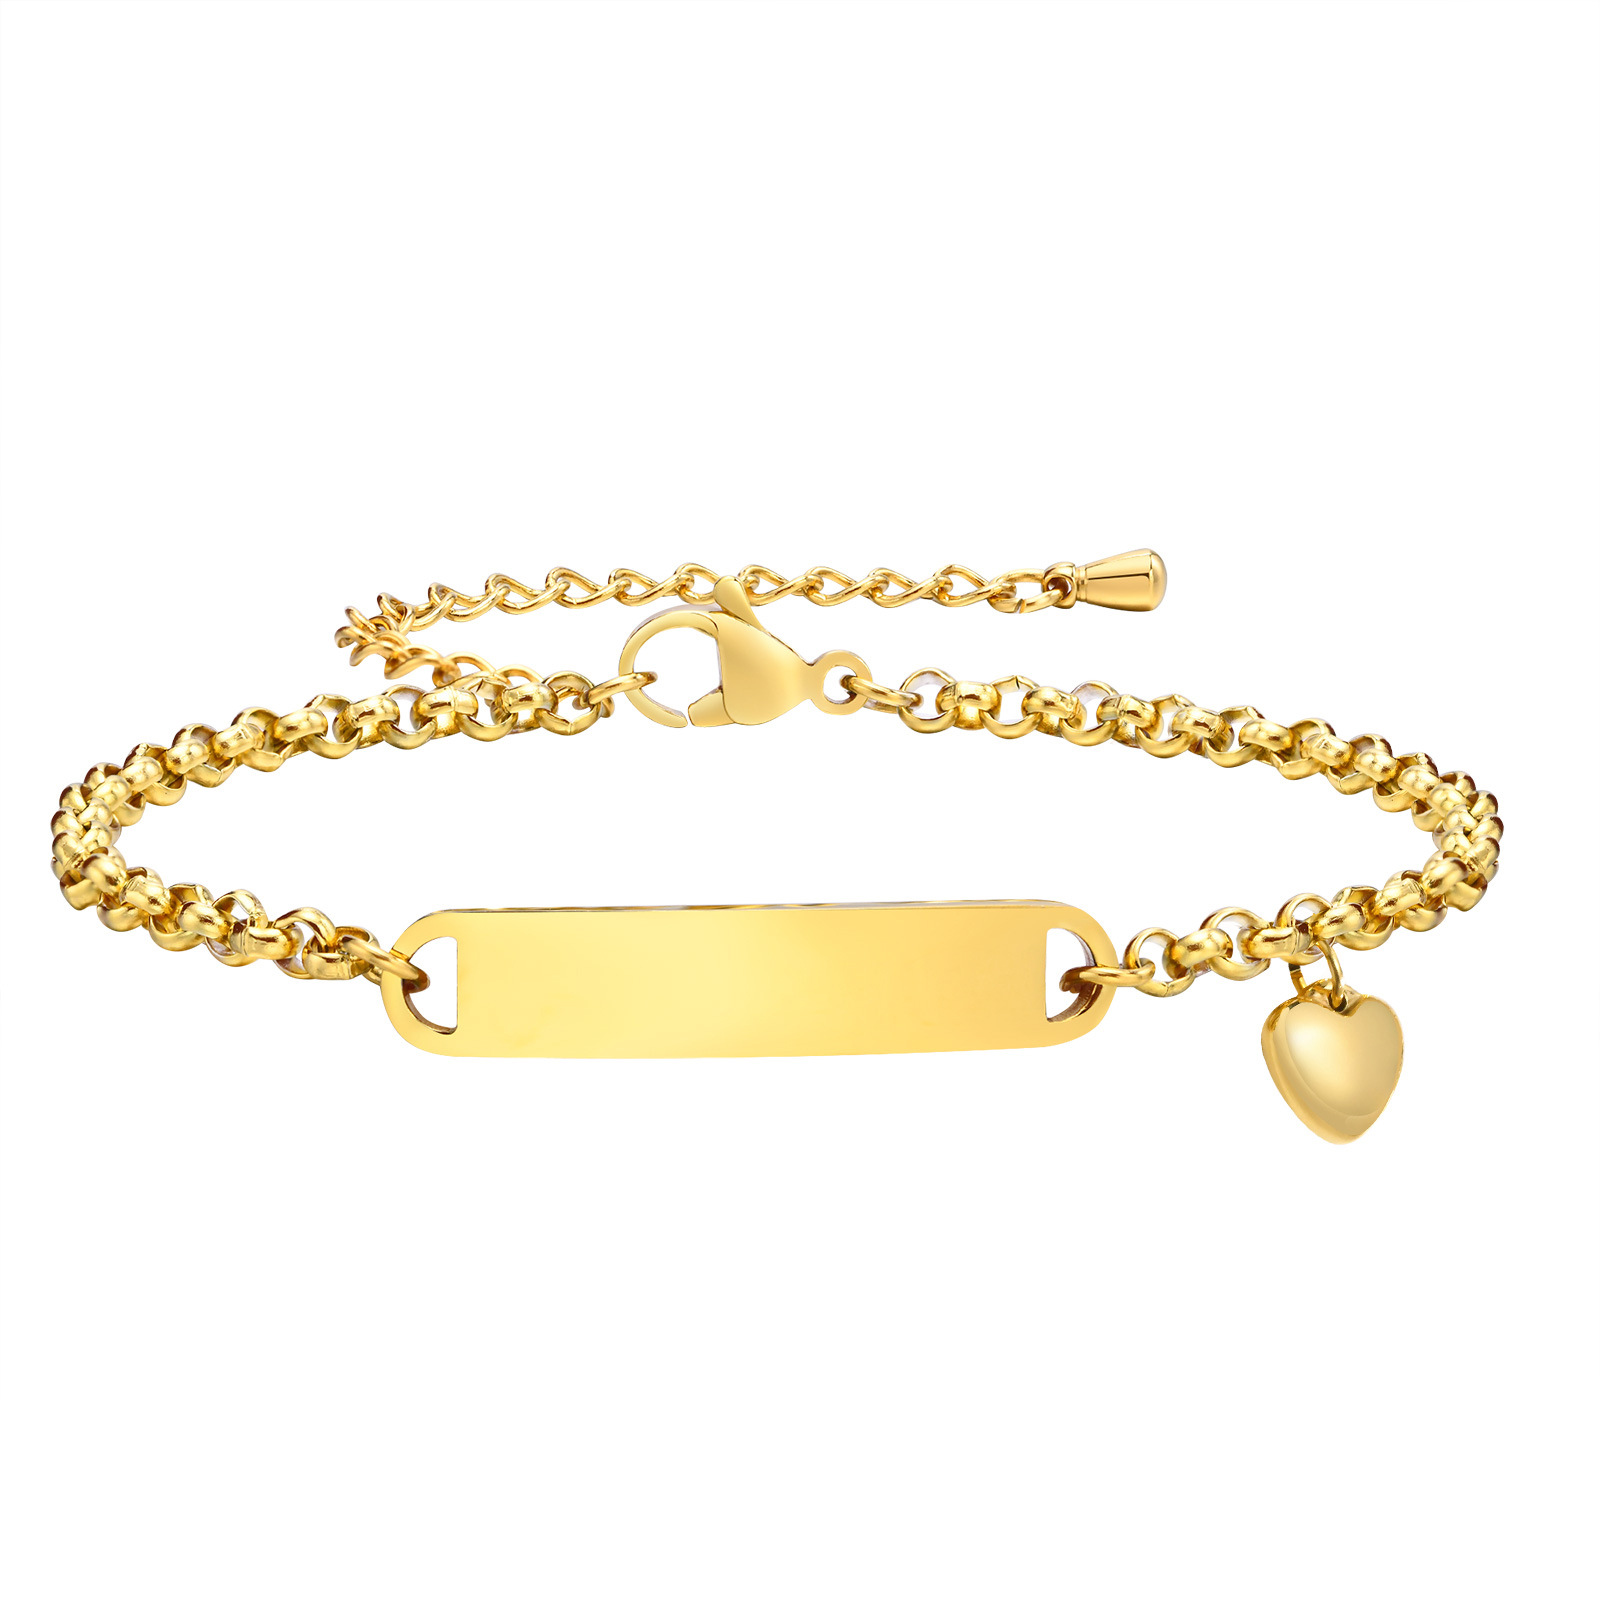 1:Gold chain width 3MM; Total chain length 16.5-5MM